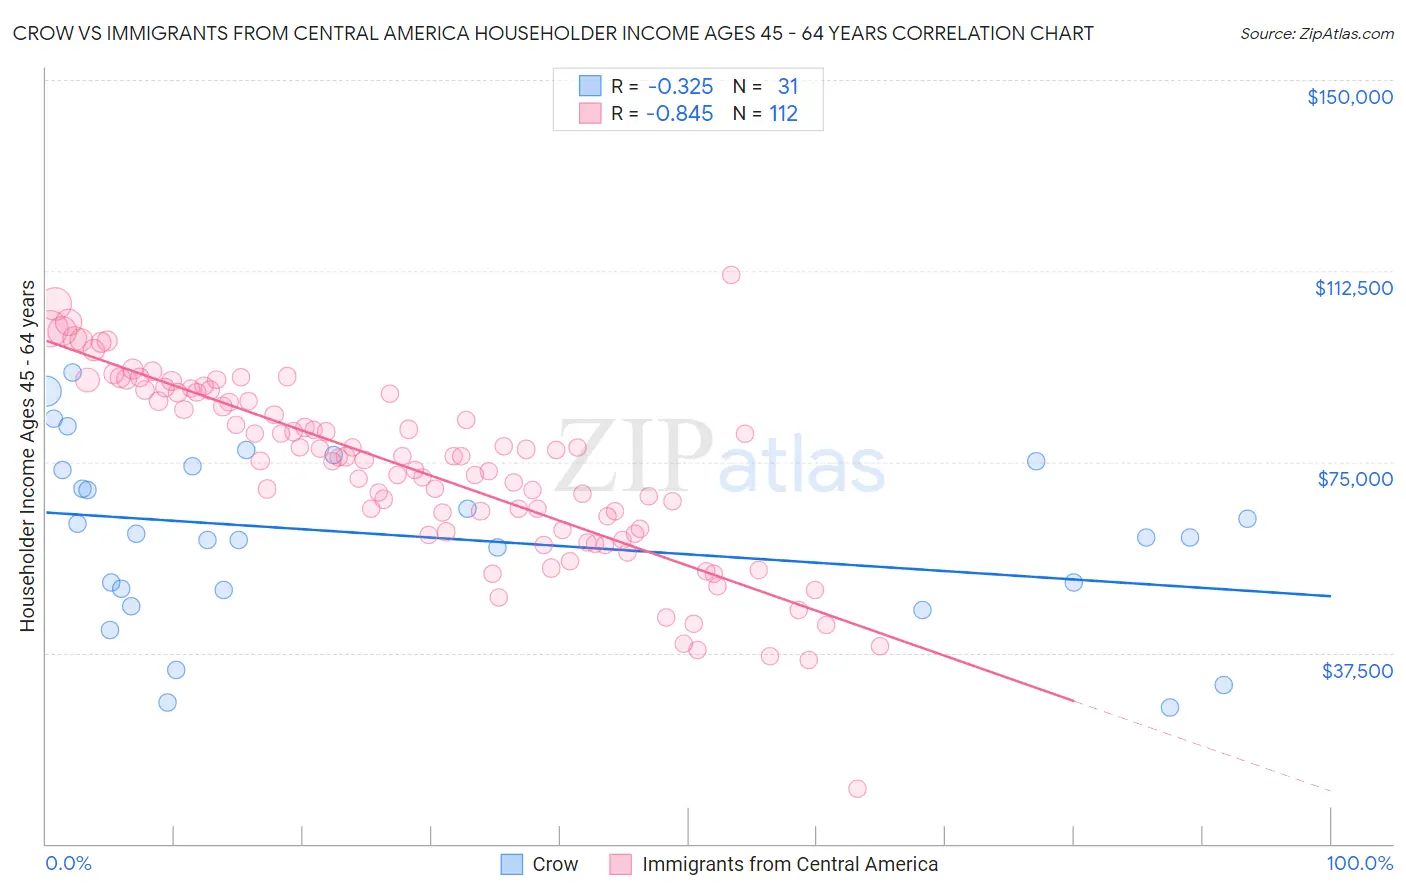 Crow vs Immigrants from Central America Householder Income Ages 45 - 64 years